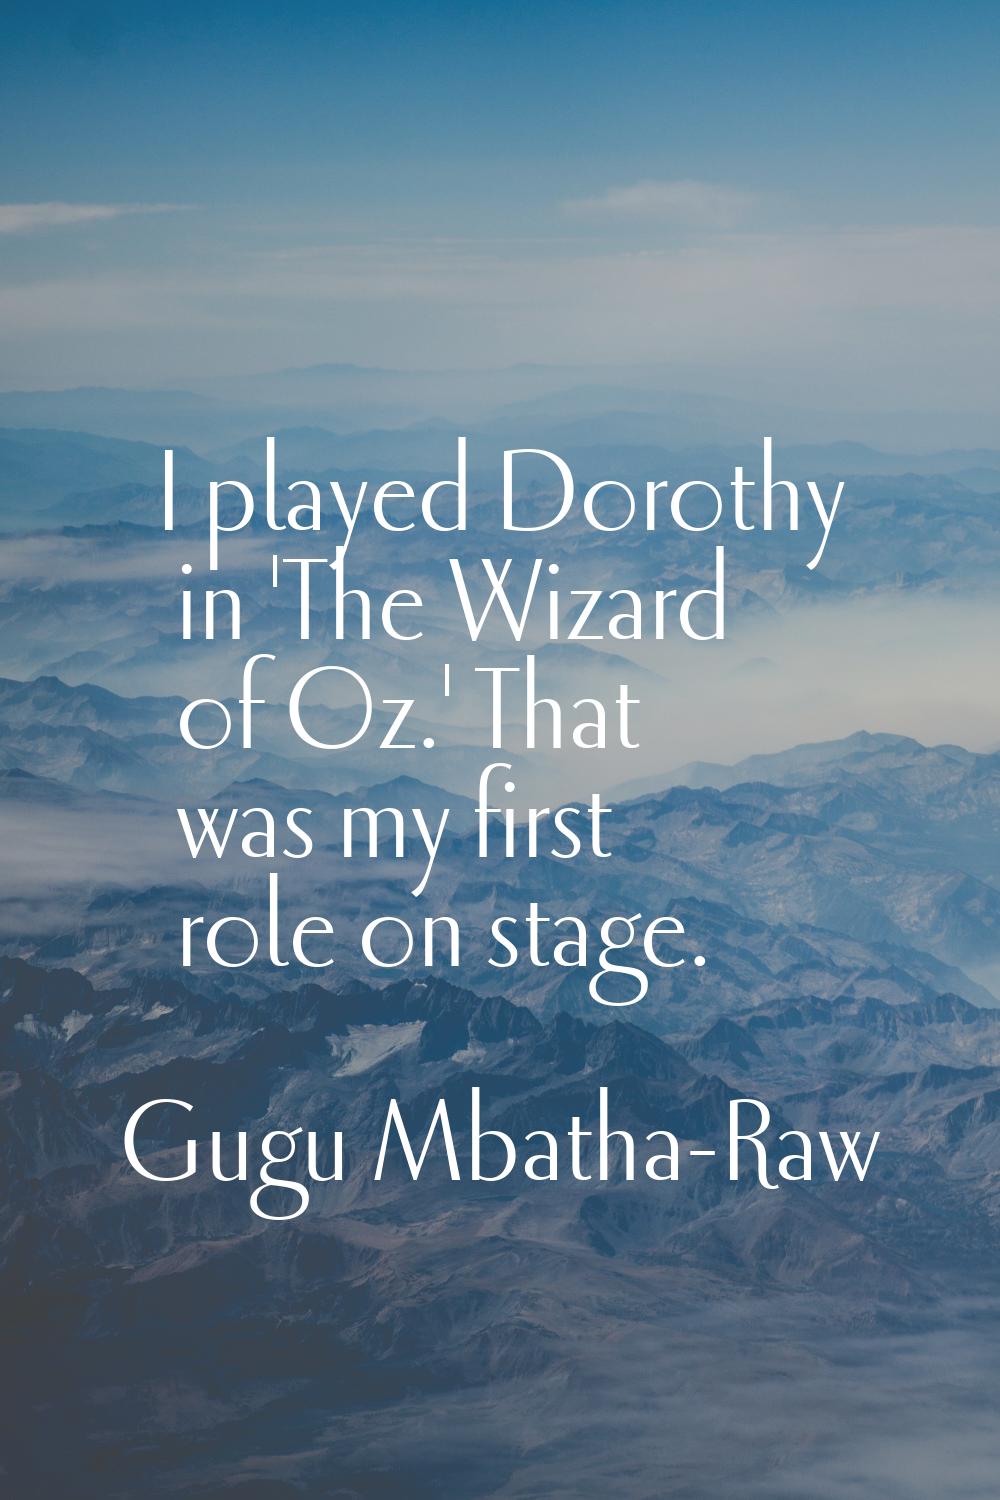 I played Dorothy in 'The Wizard of Oz.' That was my first role on stage.